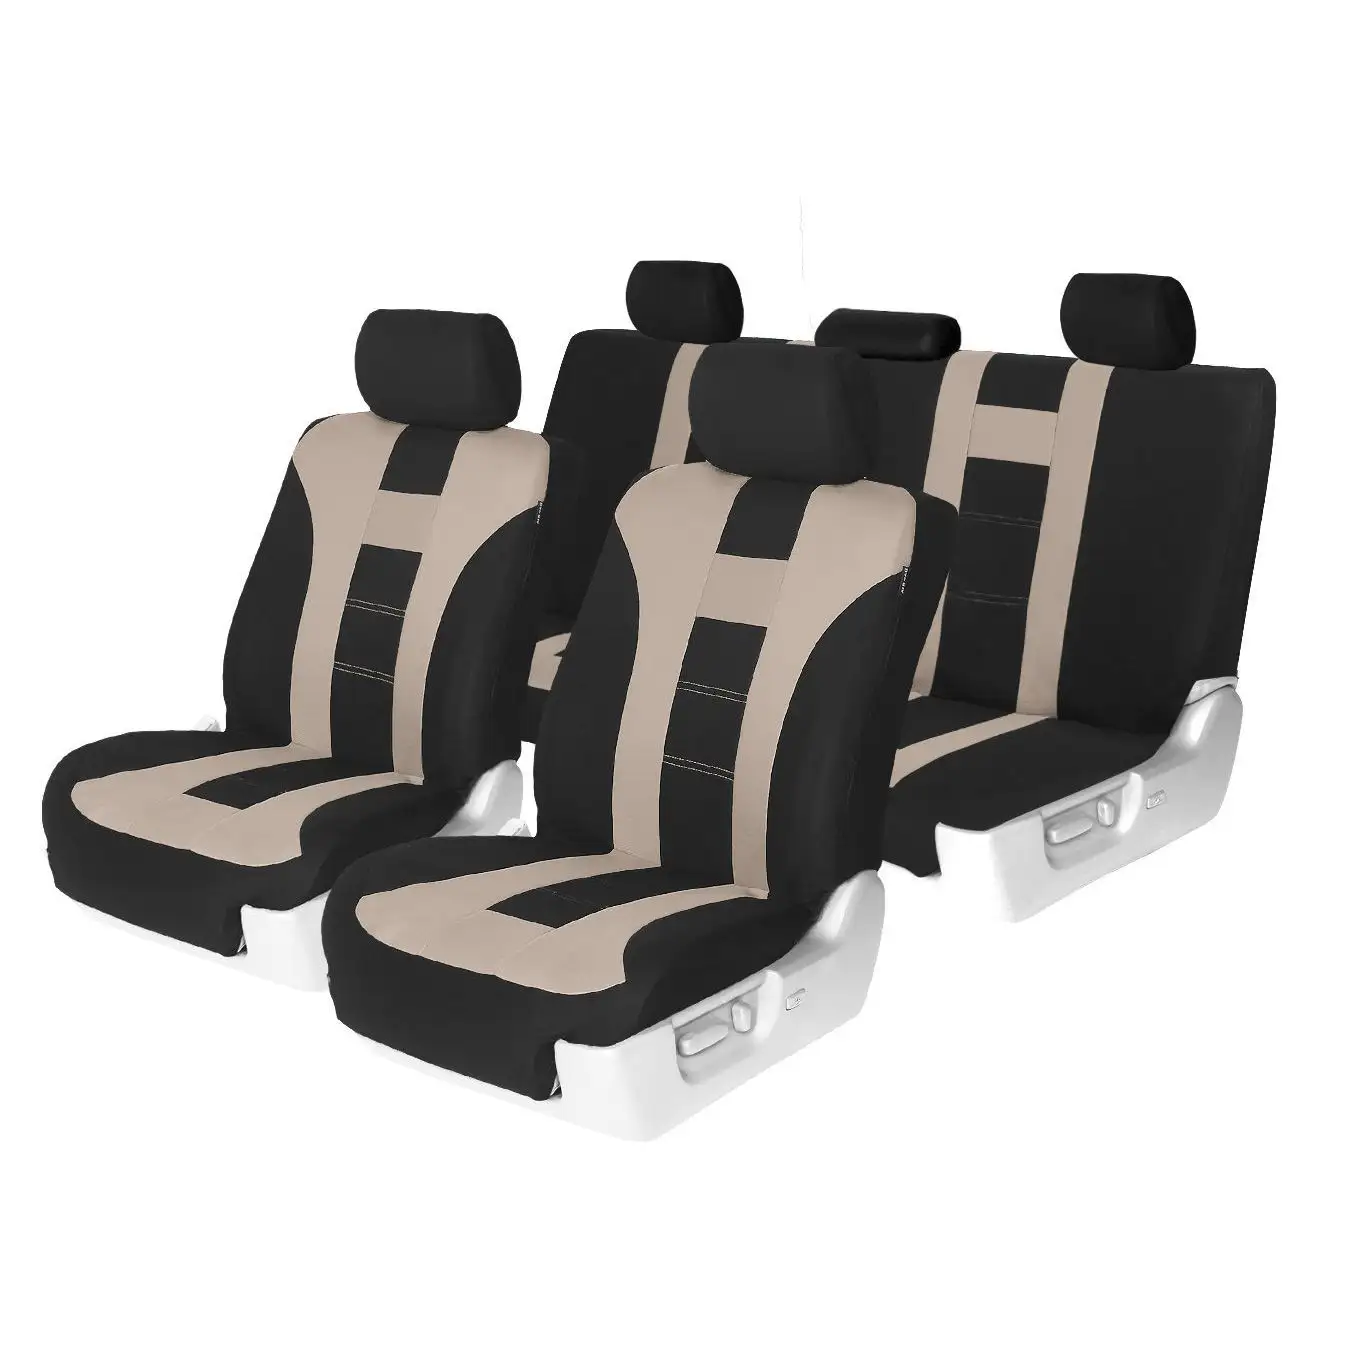 Kanglida Manufacturers Direct Sales of High Quality Luxury Custom Polyester Universal Car Seat Covers